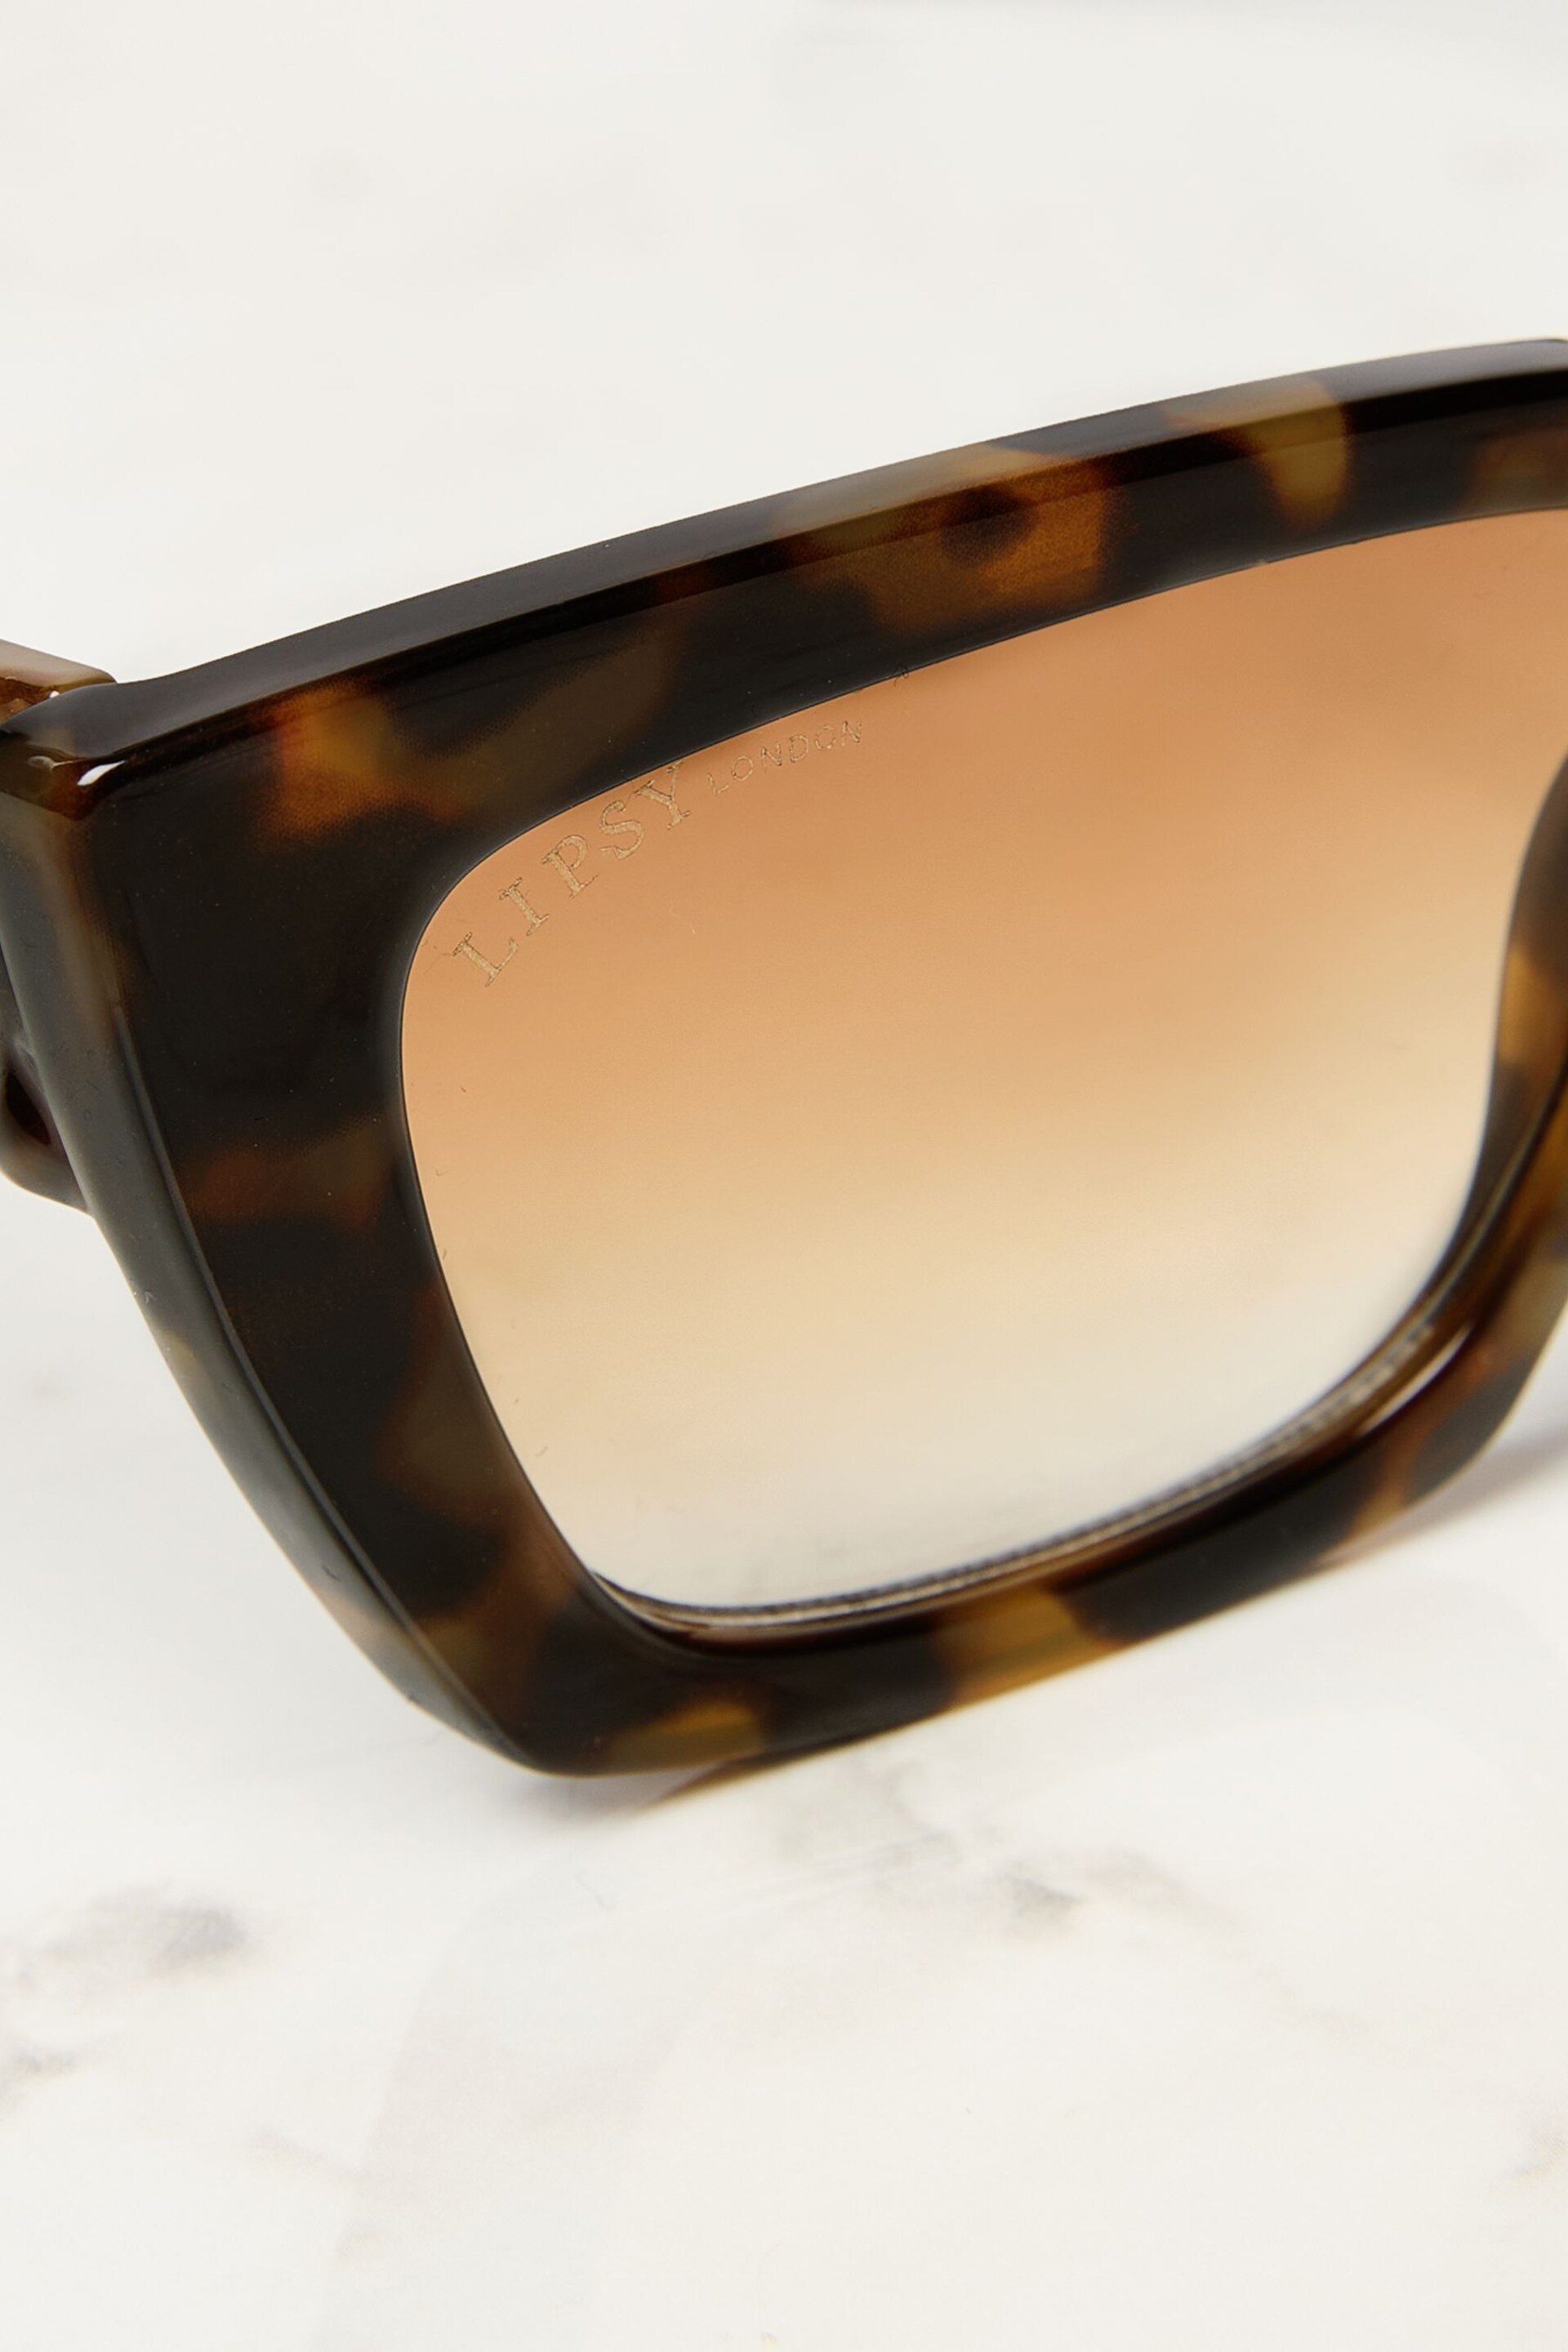 Lipsy Brown Oversized Cateye Quilted Sunglasses - Image 4 of 4